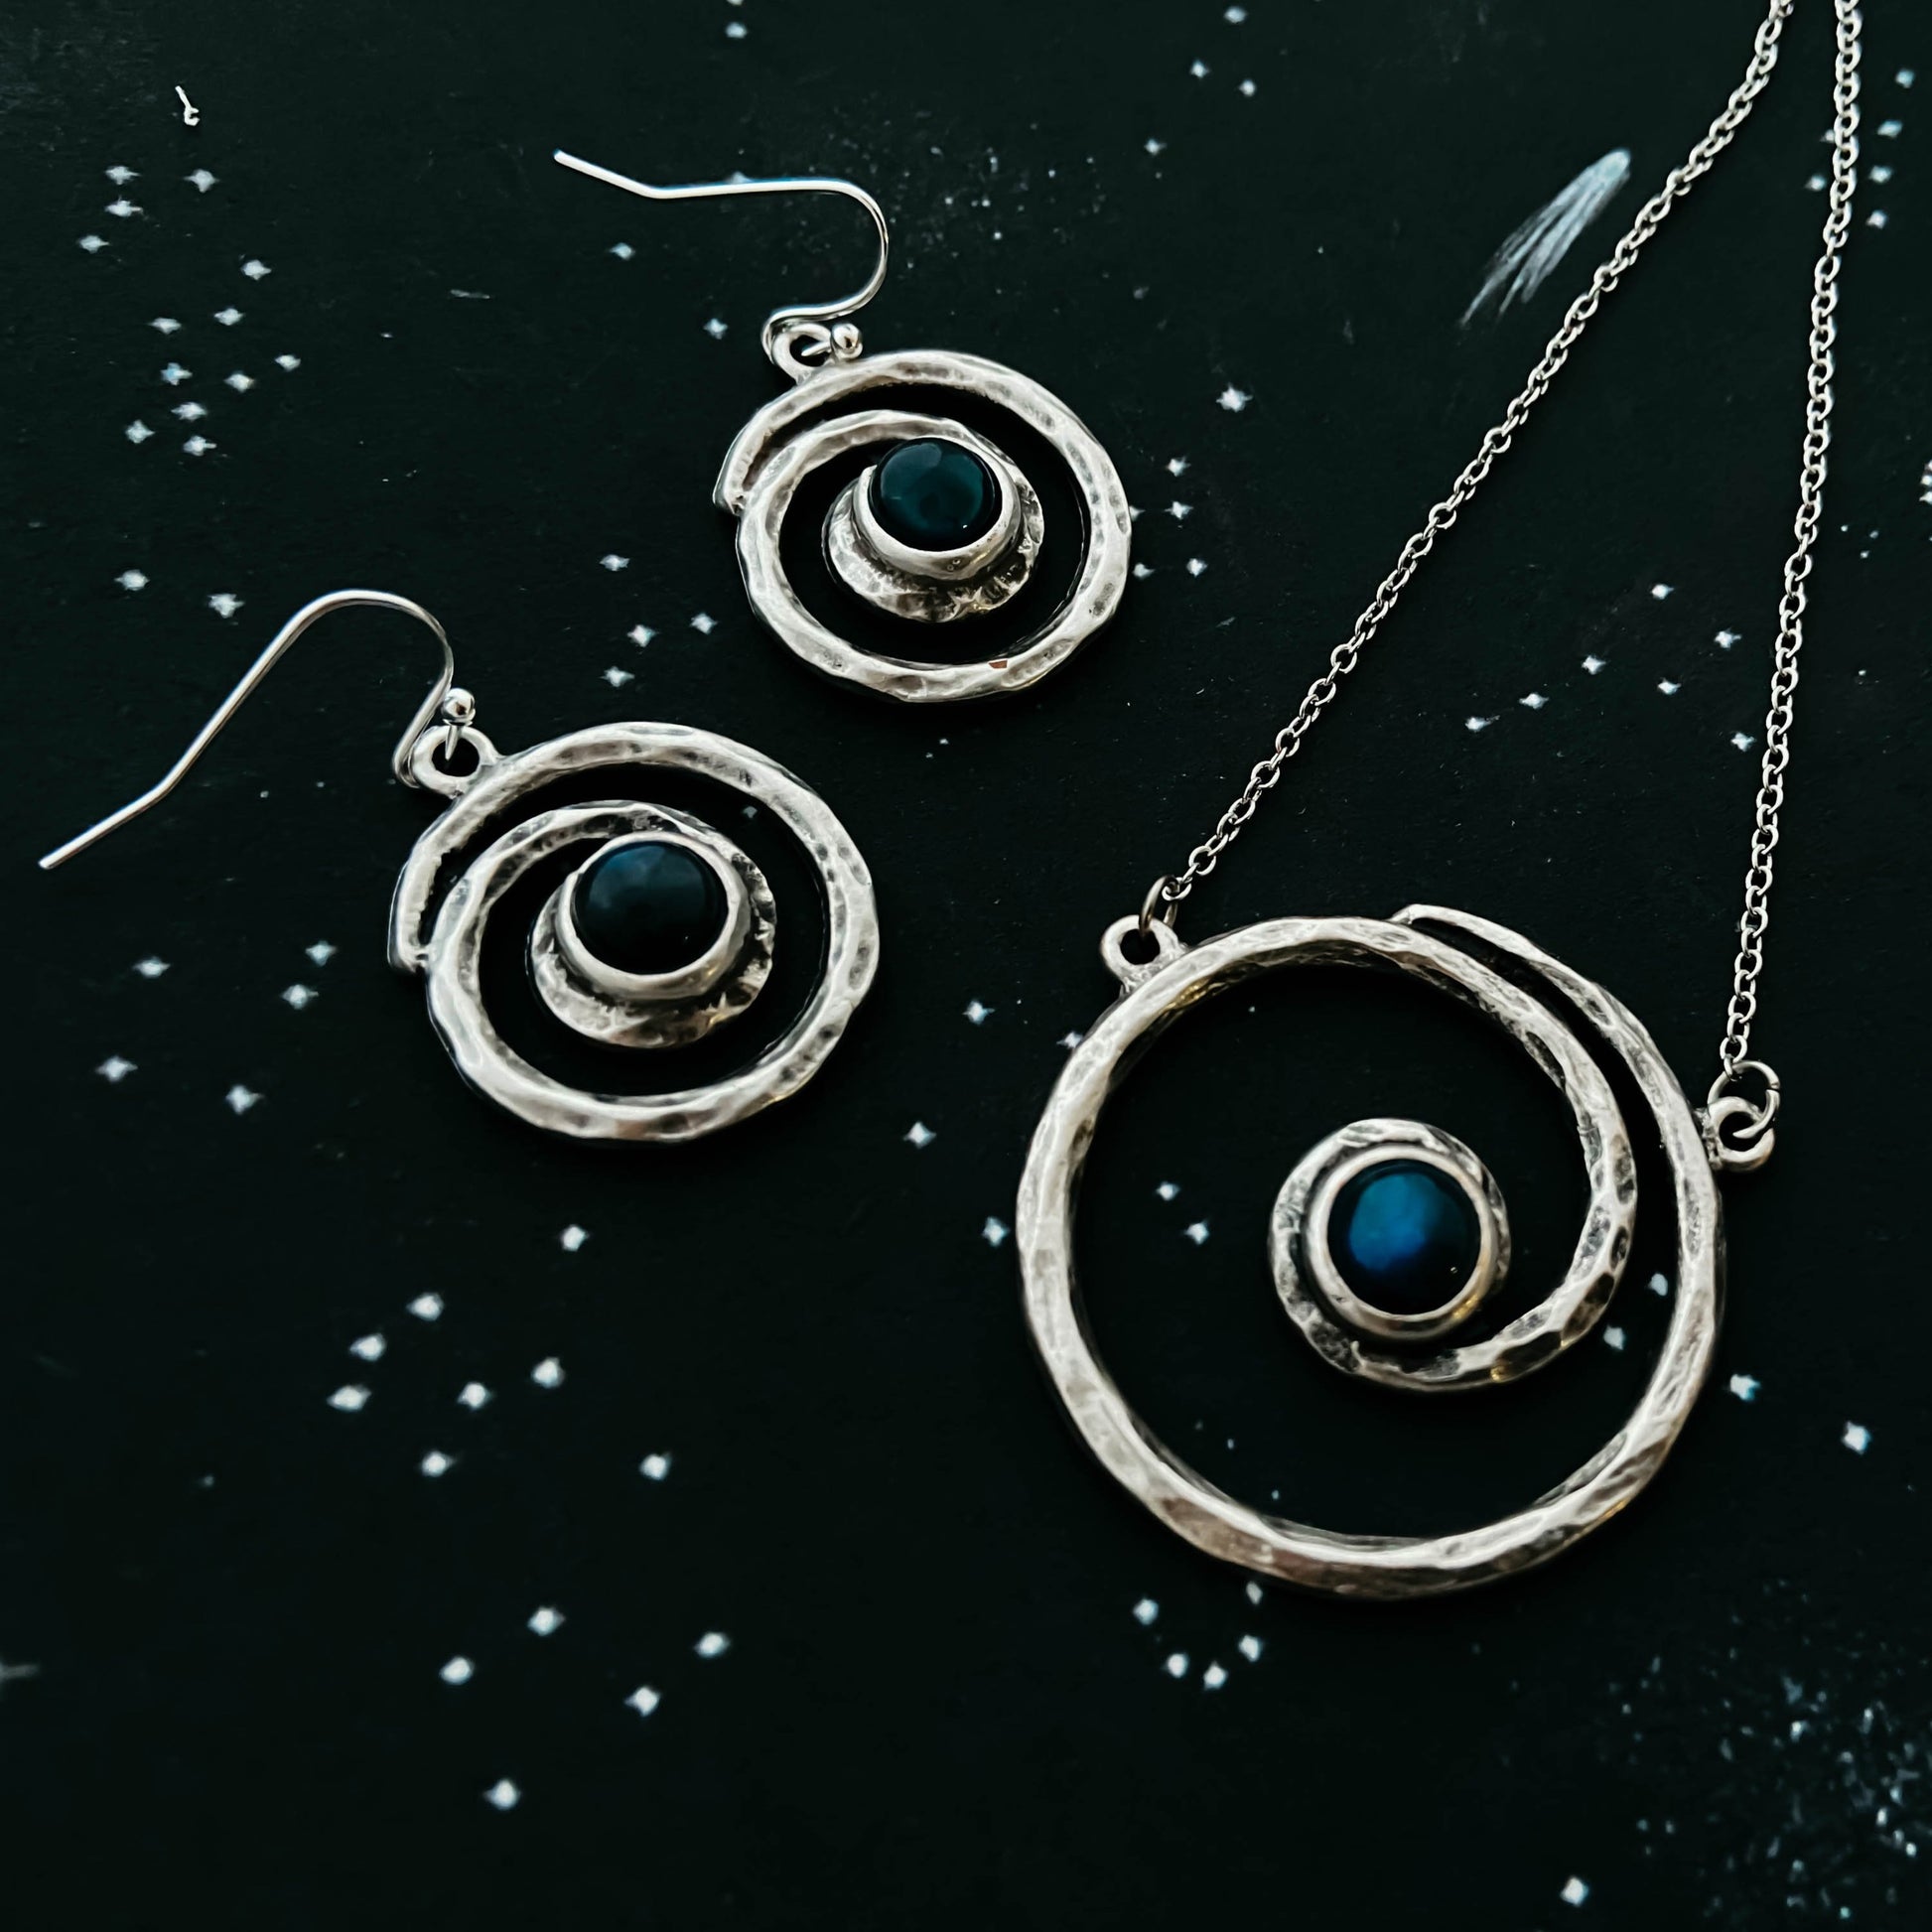 Milky Way Jewelry Set - Spiral Silver Necklace and Earrings with Labradorite Jewelry Set Yugen Handmade   